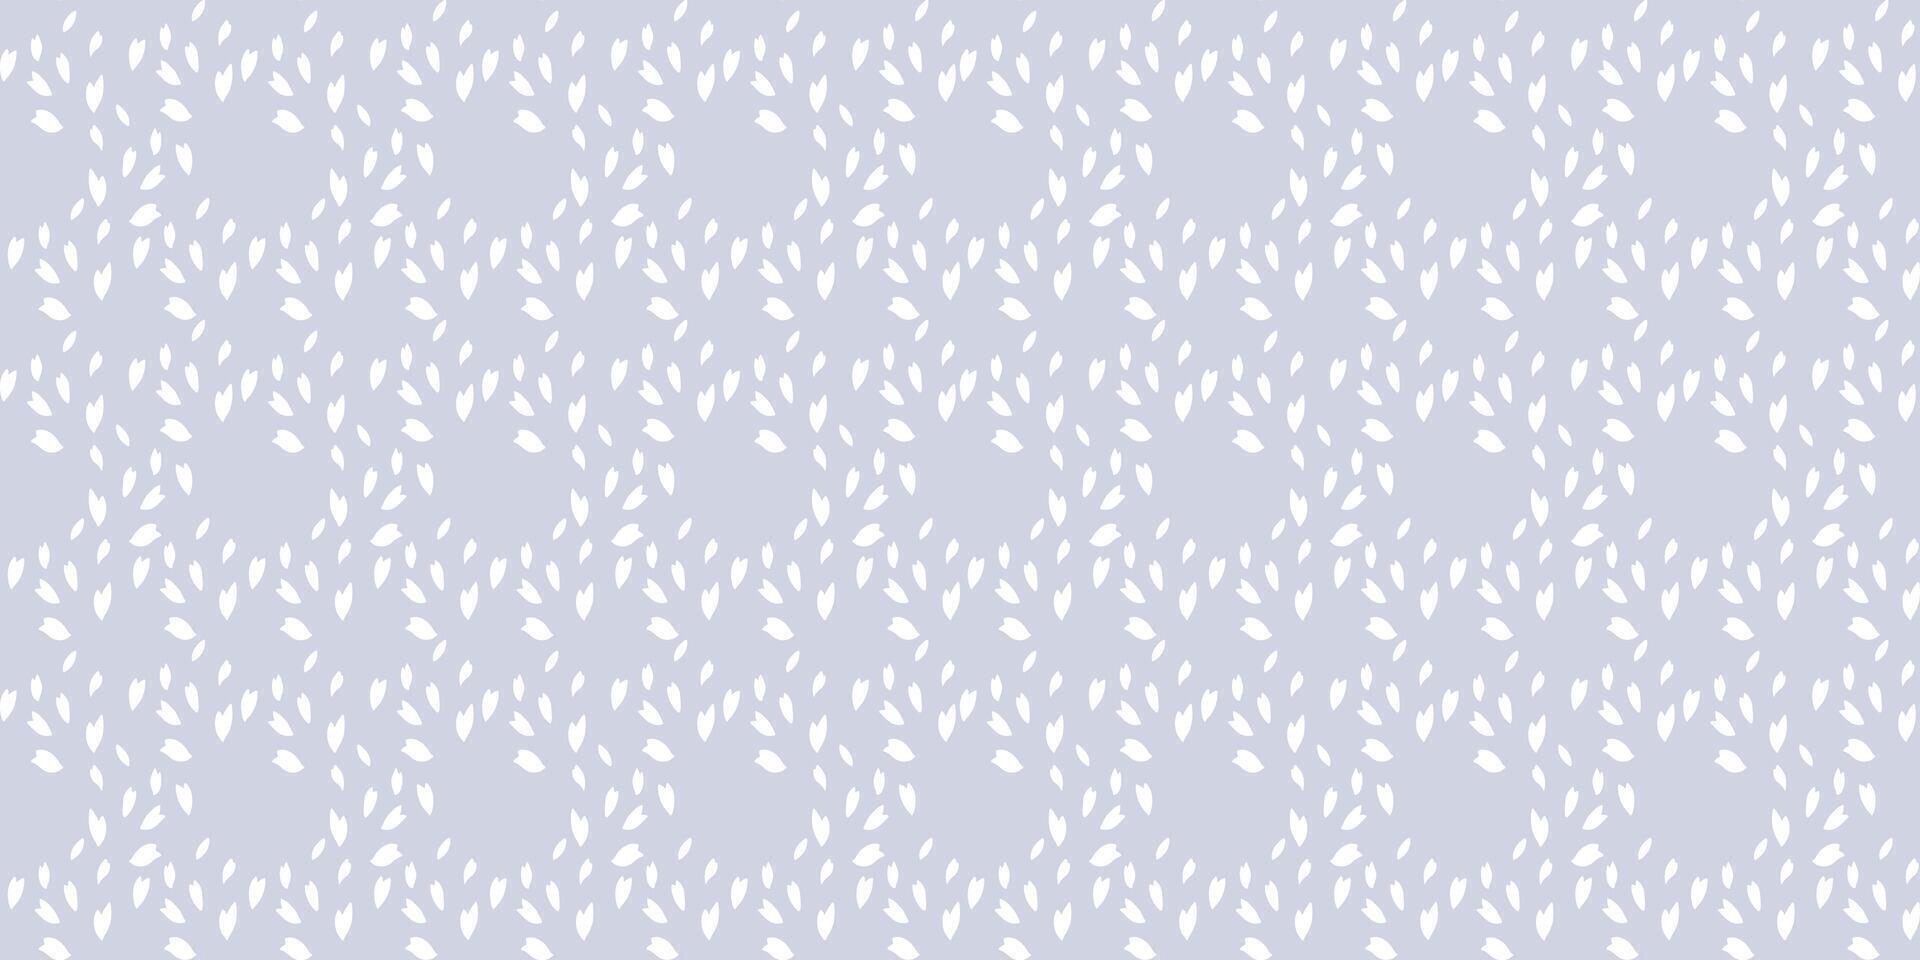 Simple light seamless pattern with abstract rhombus with shapes tiny polka dots on a grey background. Vector hand drawn sketch random drops, spots, snowflakes, circles. Template for design ornament